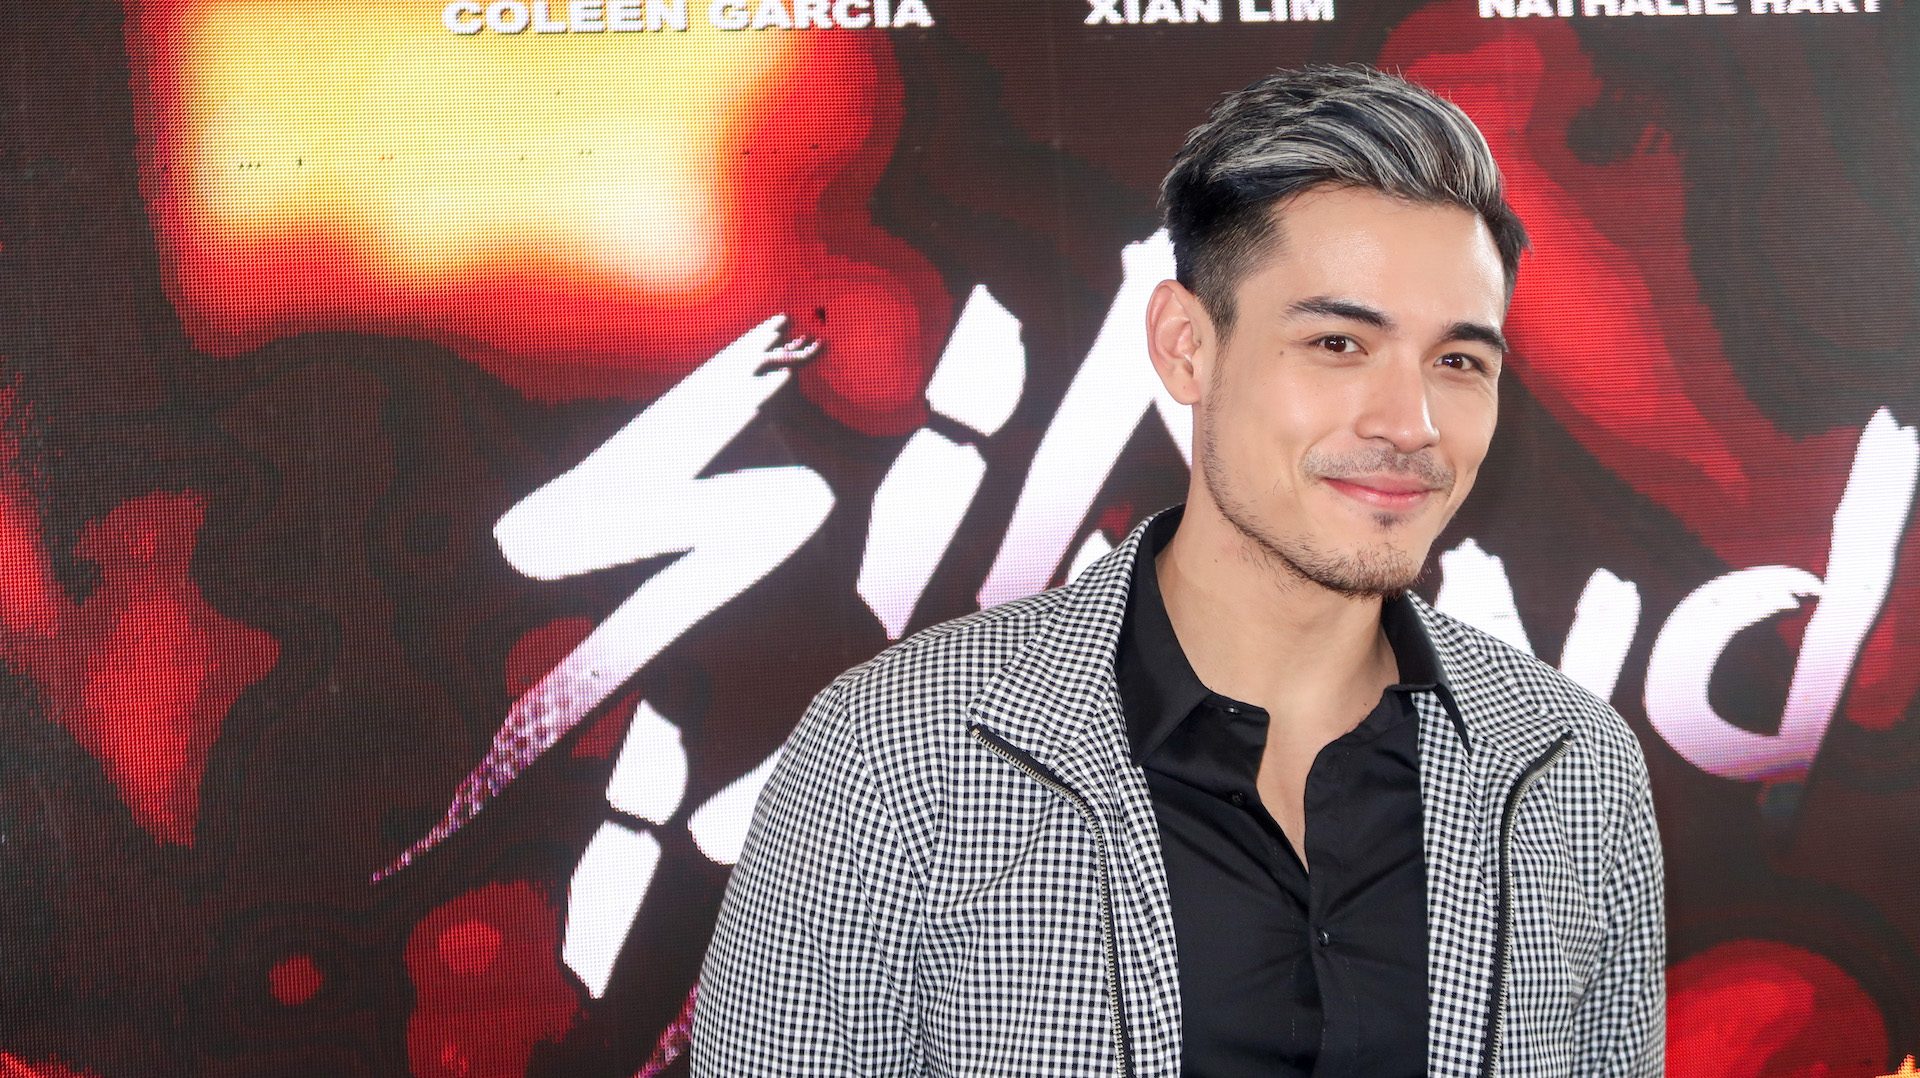 Xian Lim will direct his first movie for Cinemalaya 2019